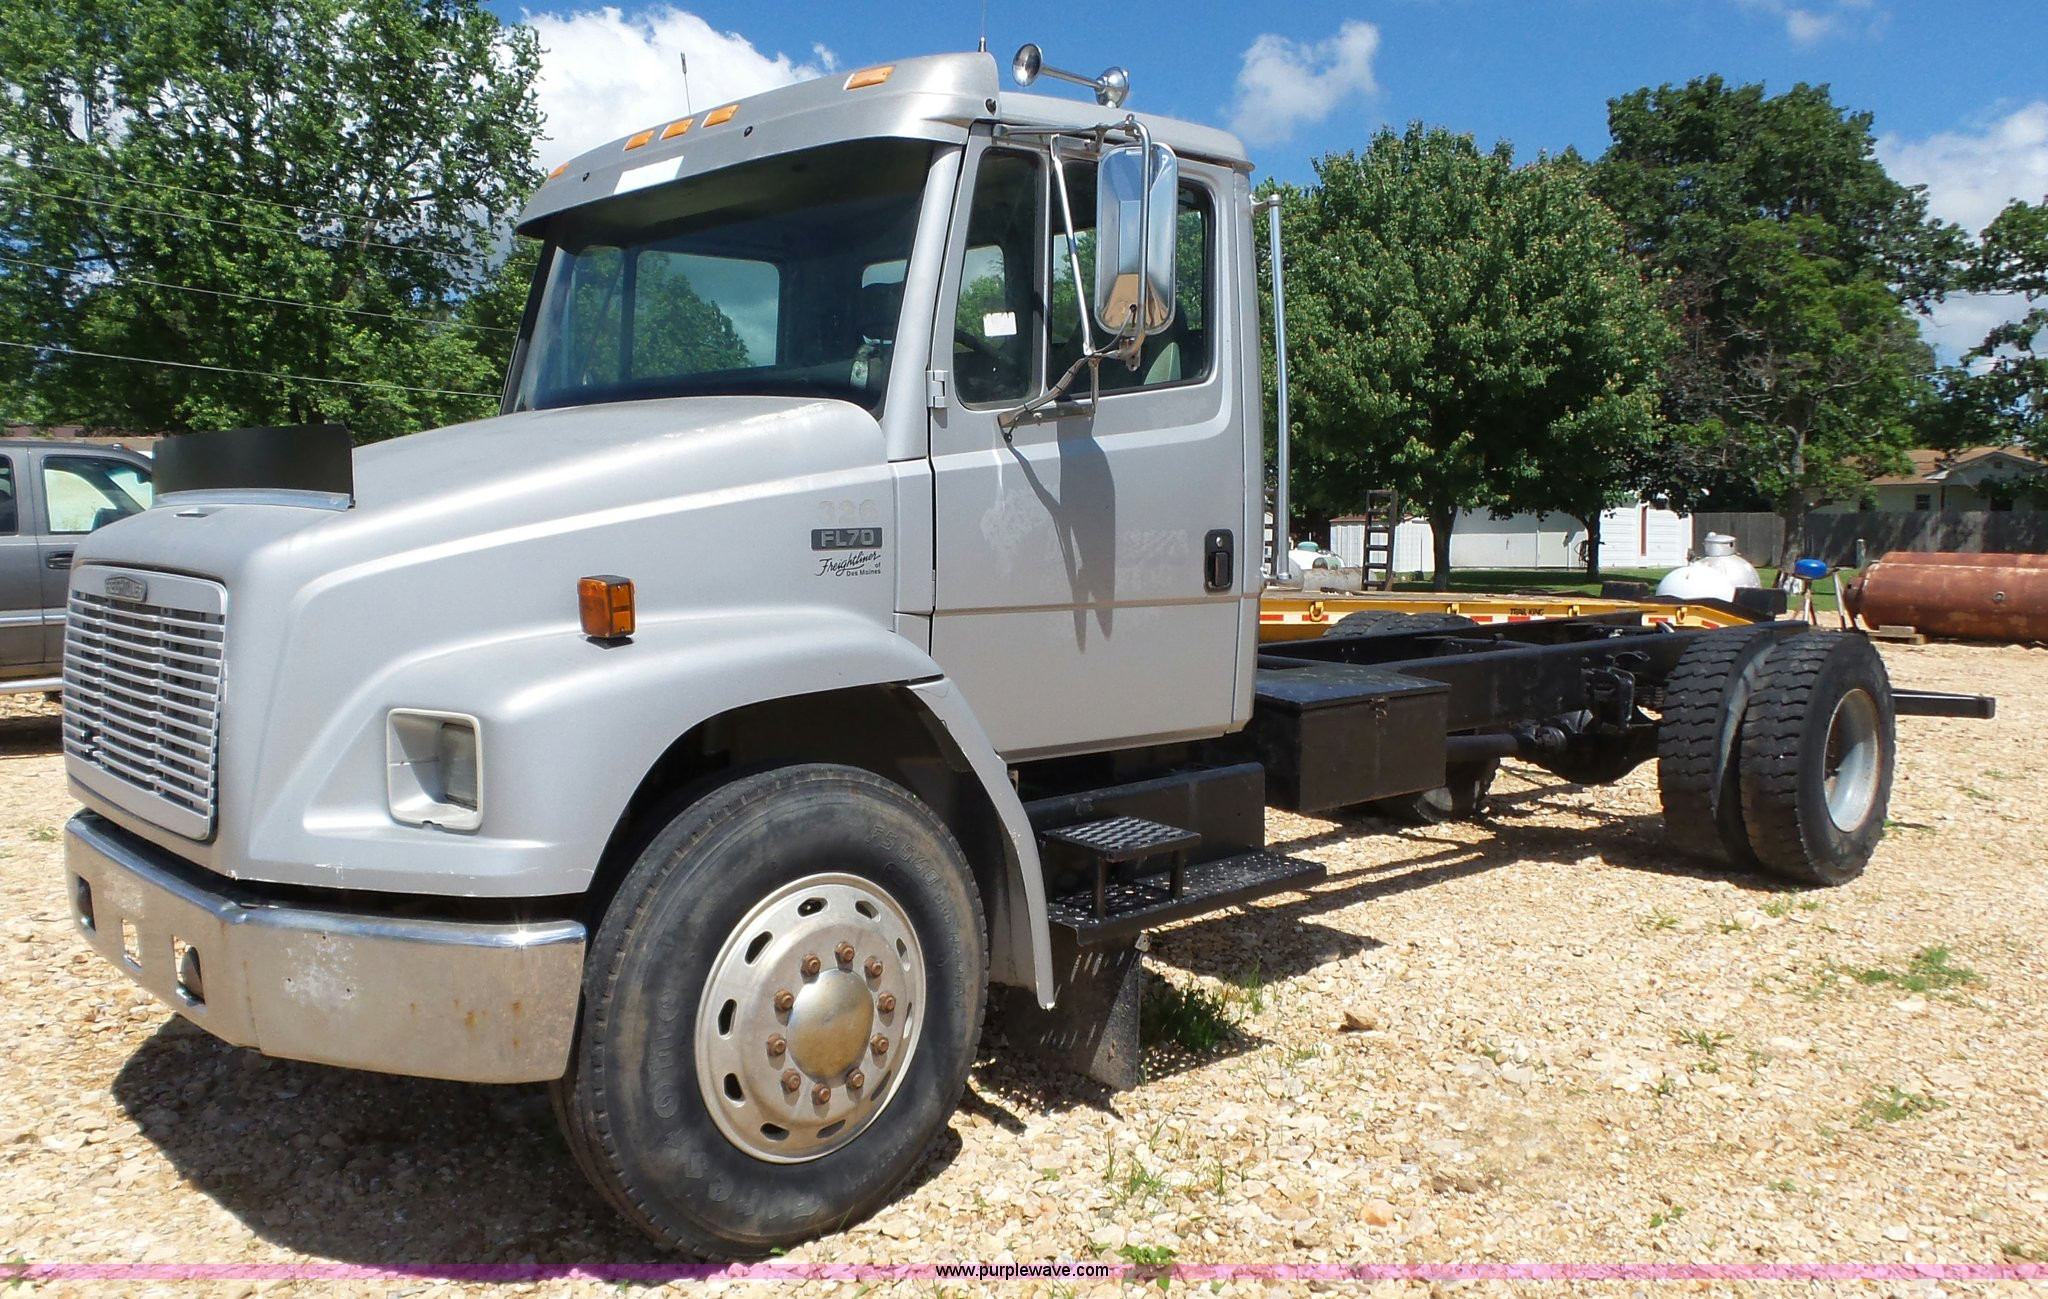 Freightliner Fl70 Front Air Break Adjustment 1995 Freightliner Fl70 Truck Cab and Chassis In Jay, Ok Item … Of Freightliner Fl70 Front Air Break Adjustment